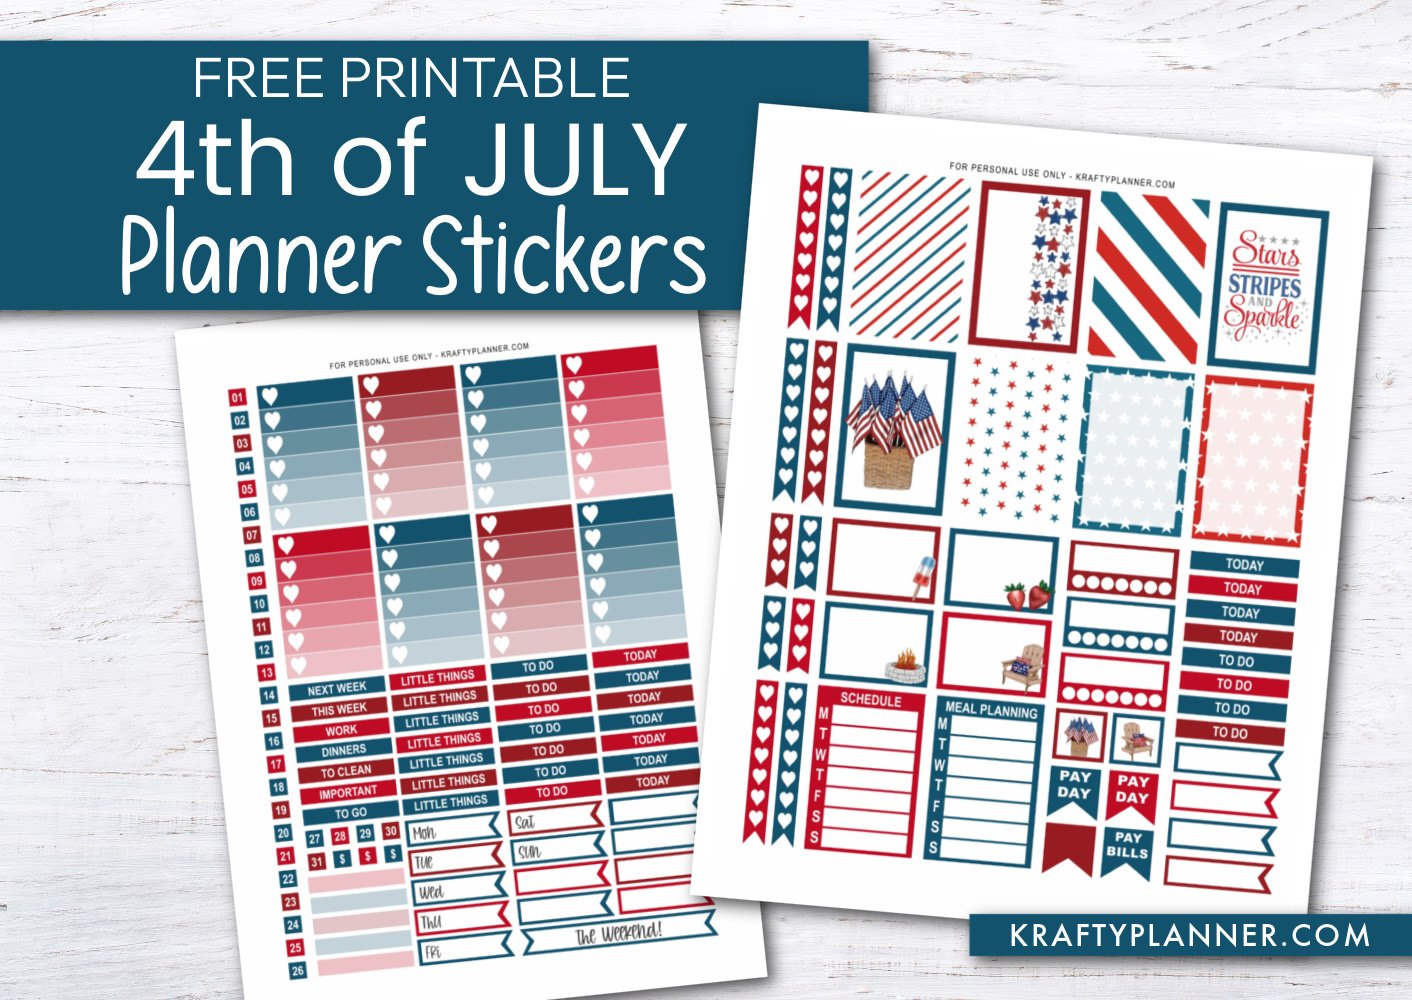 Free Printable 4th of JULY Planner Stickers.jpg